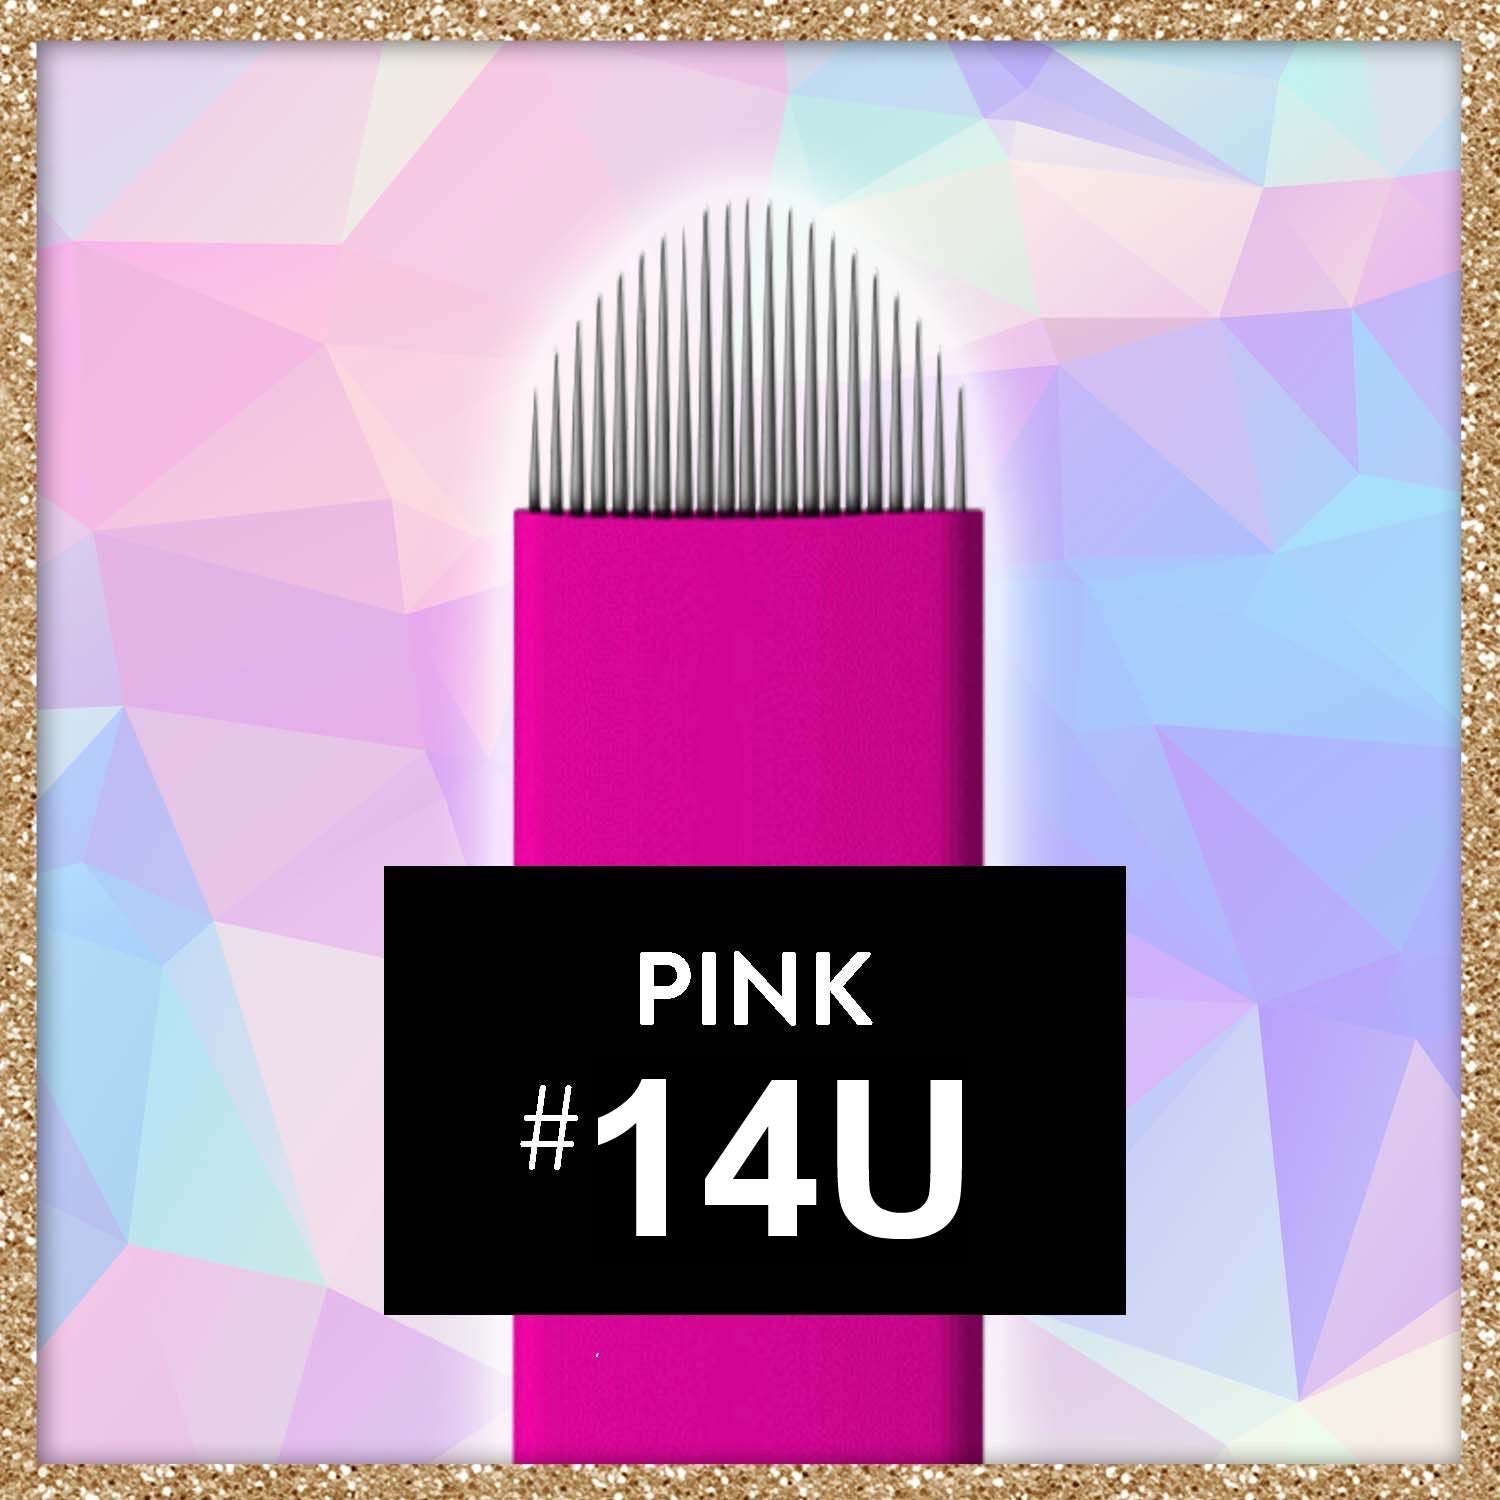 $1 Pink Collection Microblades 14U